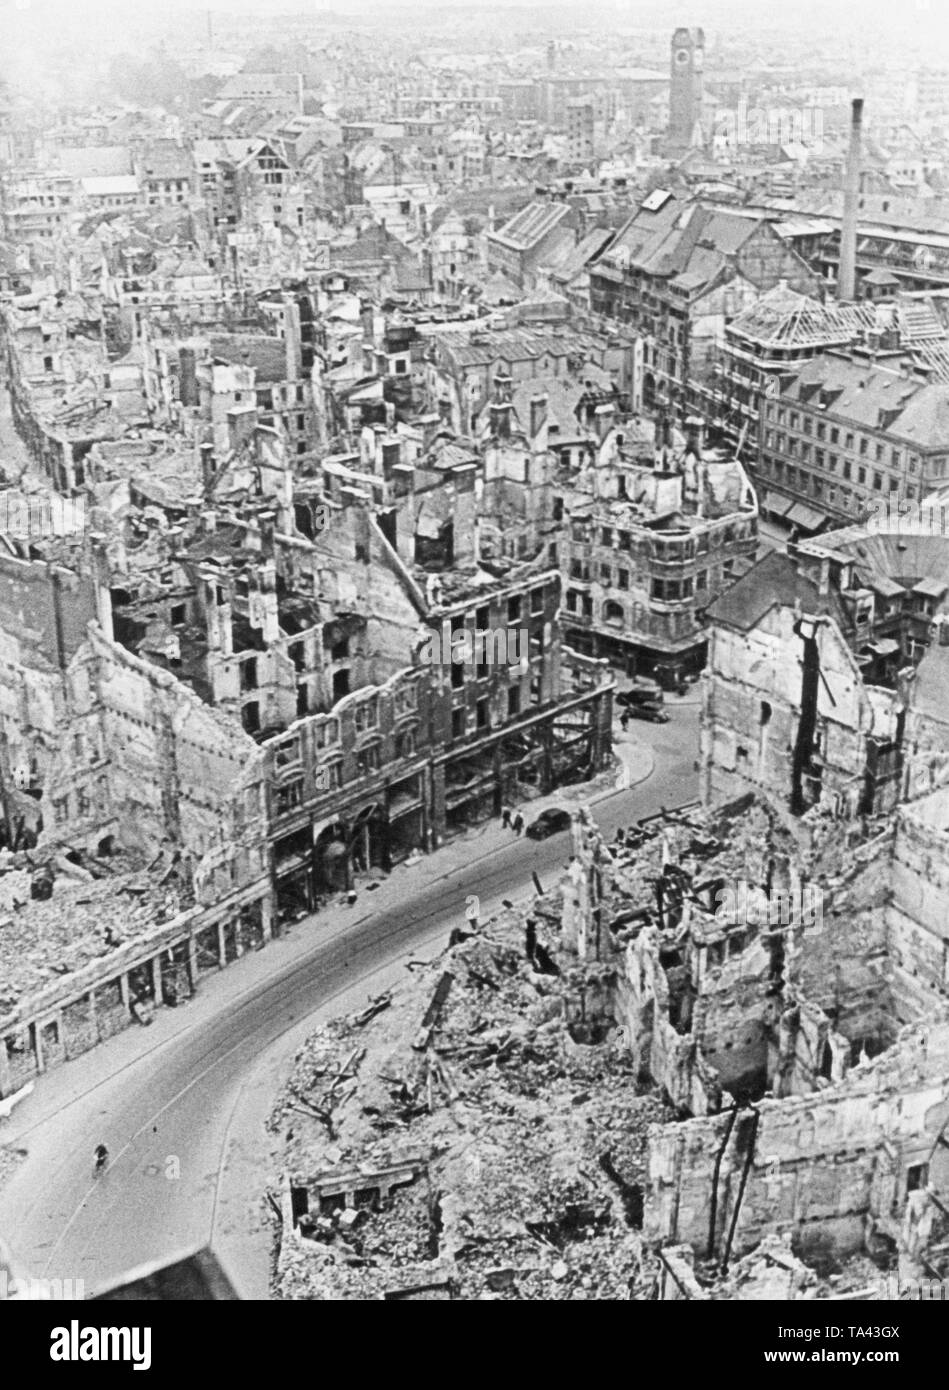 The destroyed city center of Munich after the end of the war. Stock Photo